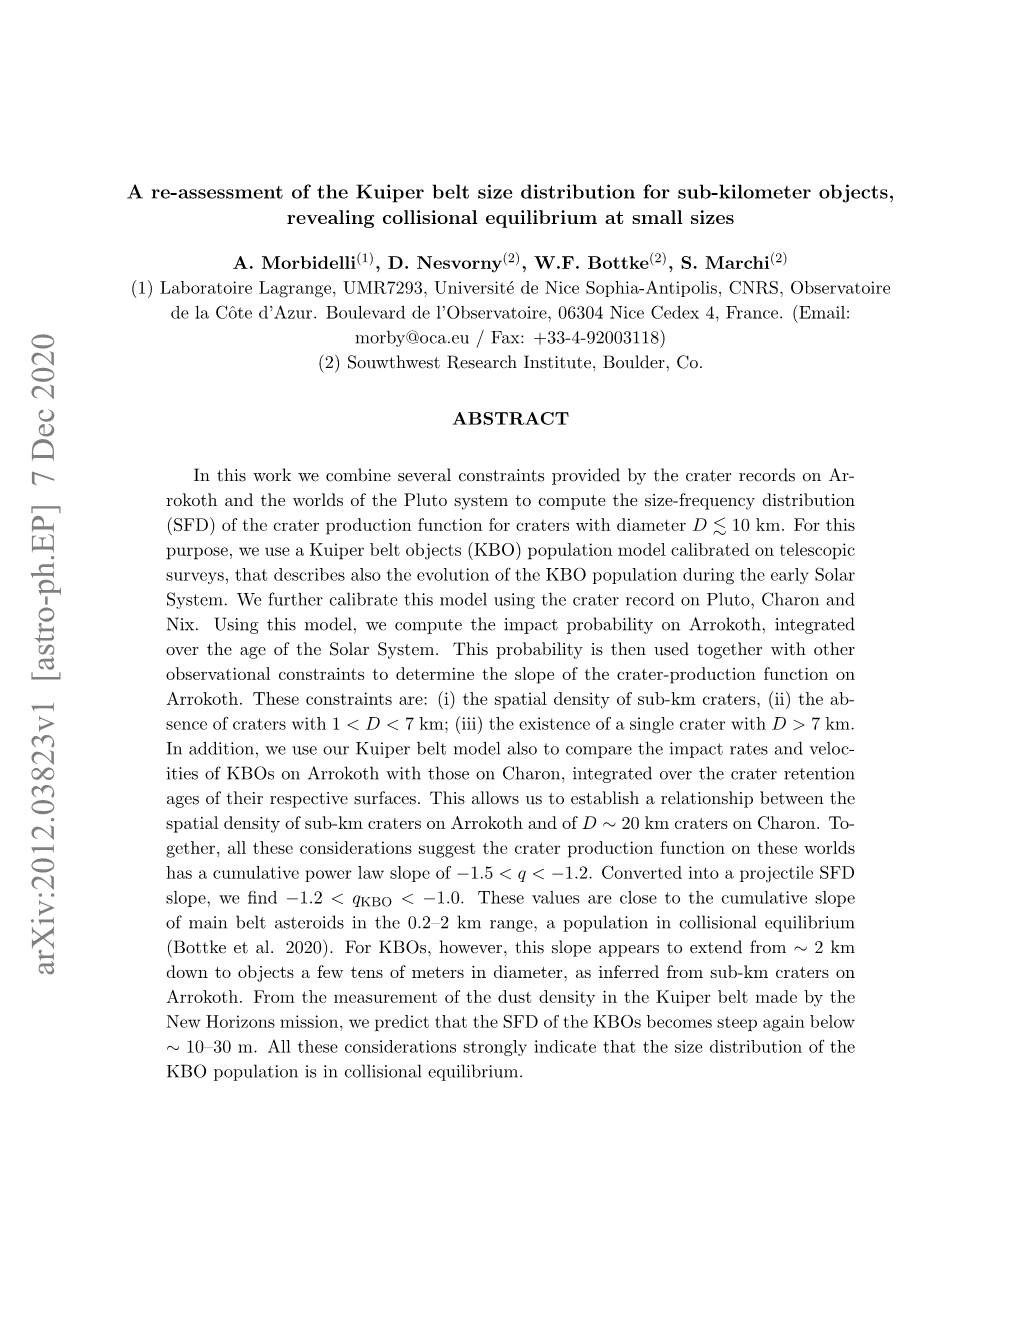 A Re-Assessment of the Kuiper Belt Size Distribution for Sub-Kilometer Objects, Revealing Collisional Equilibrium at Small Sizes